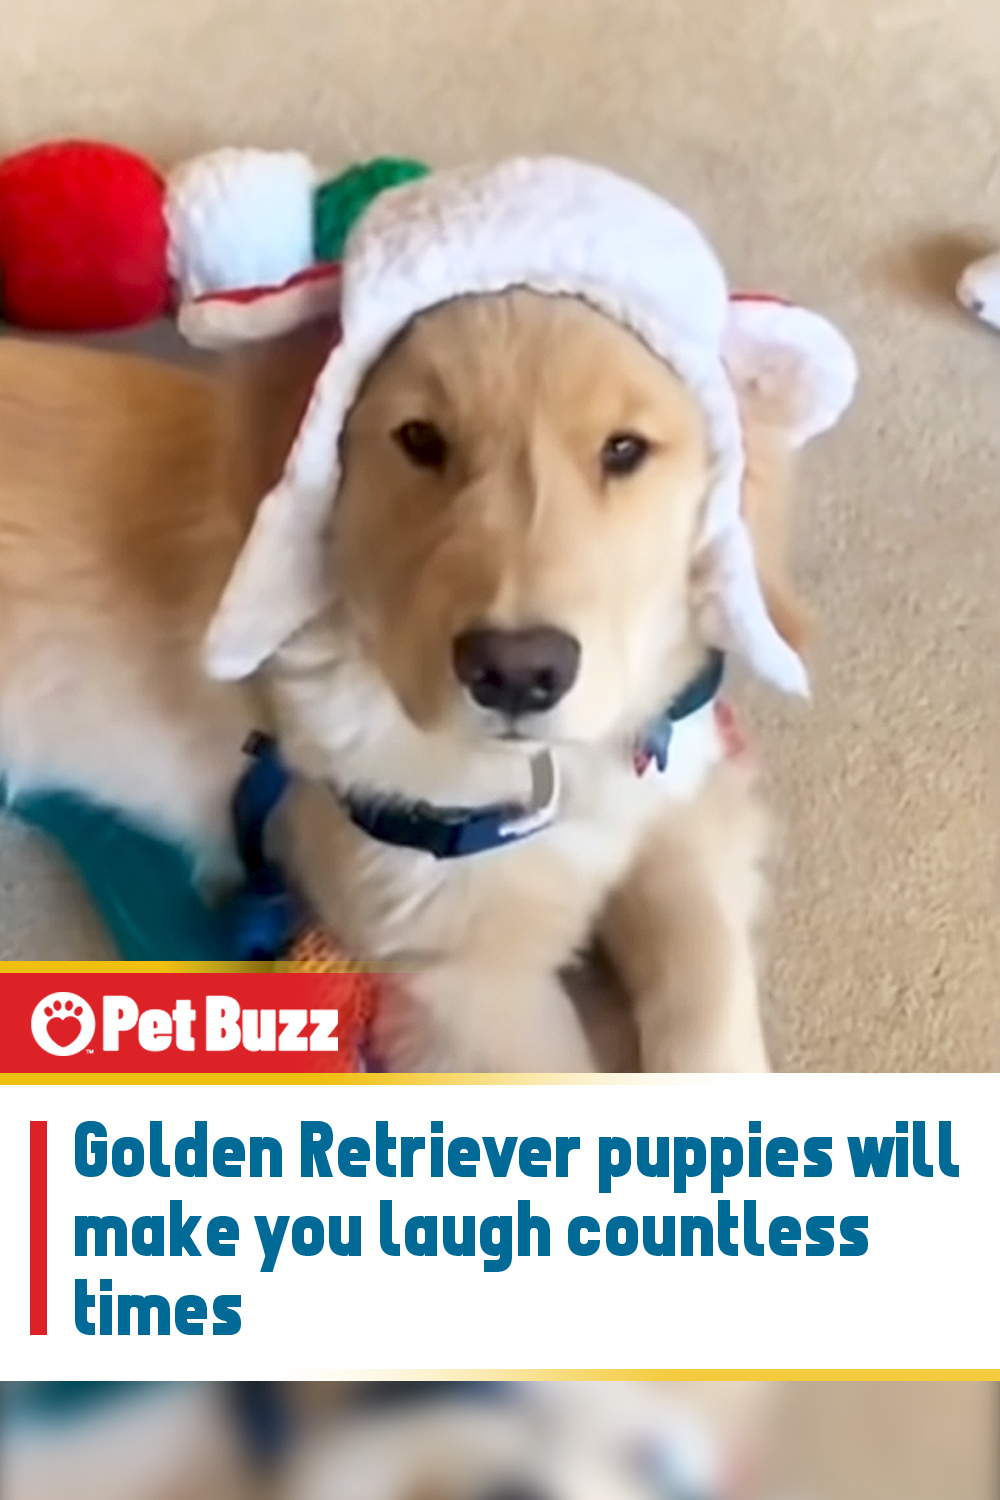 Golden Retriever puppies will make you laugh countless times